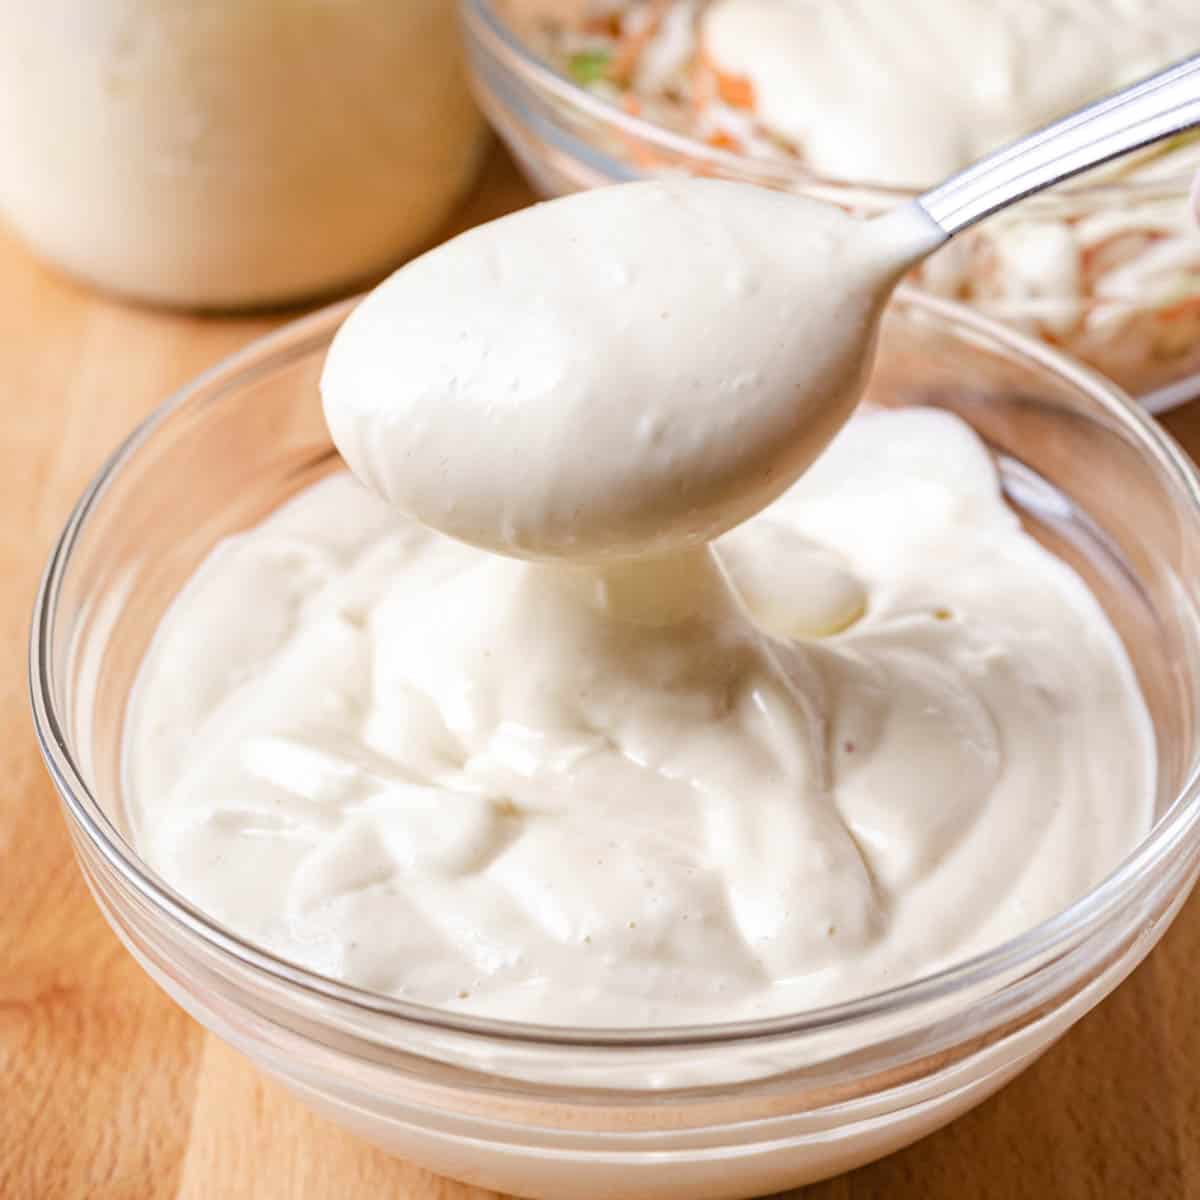 https://lowcarbafrica.com/wp-content/uploads/2021/11/Keto-Mayonnaise-IG-1.jpg